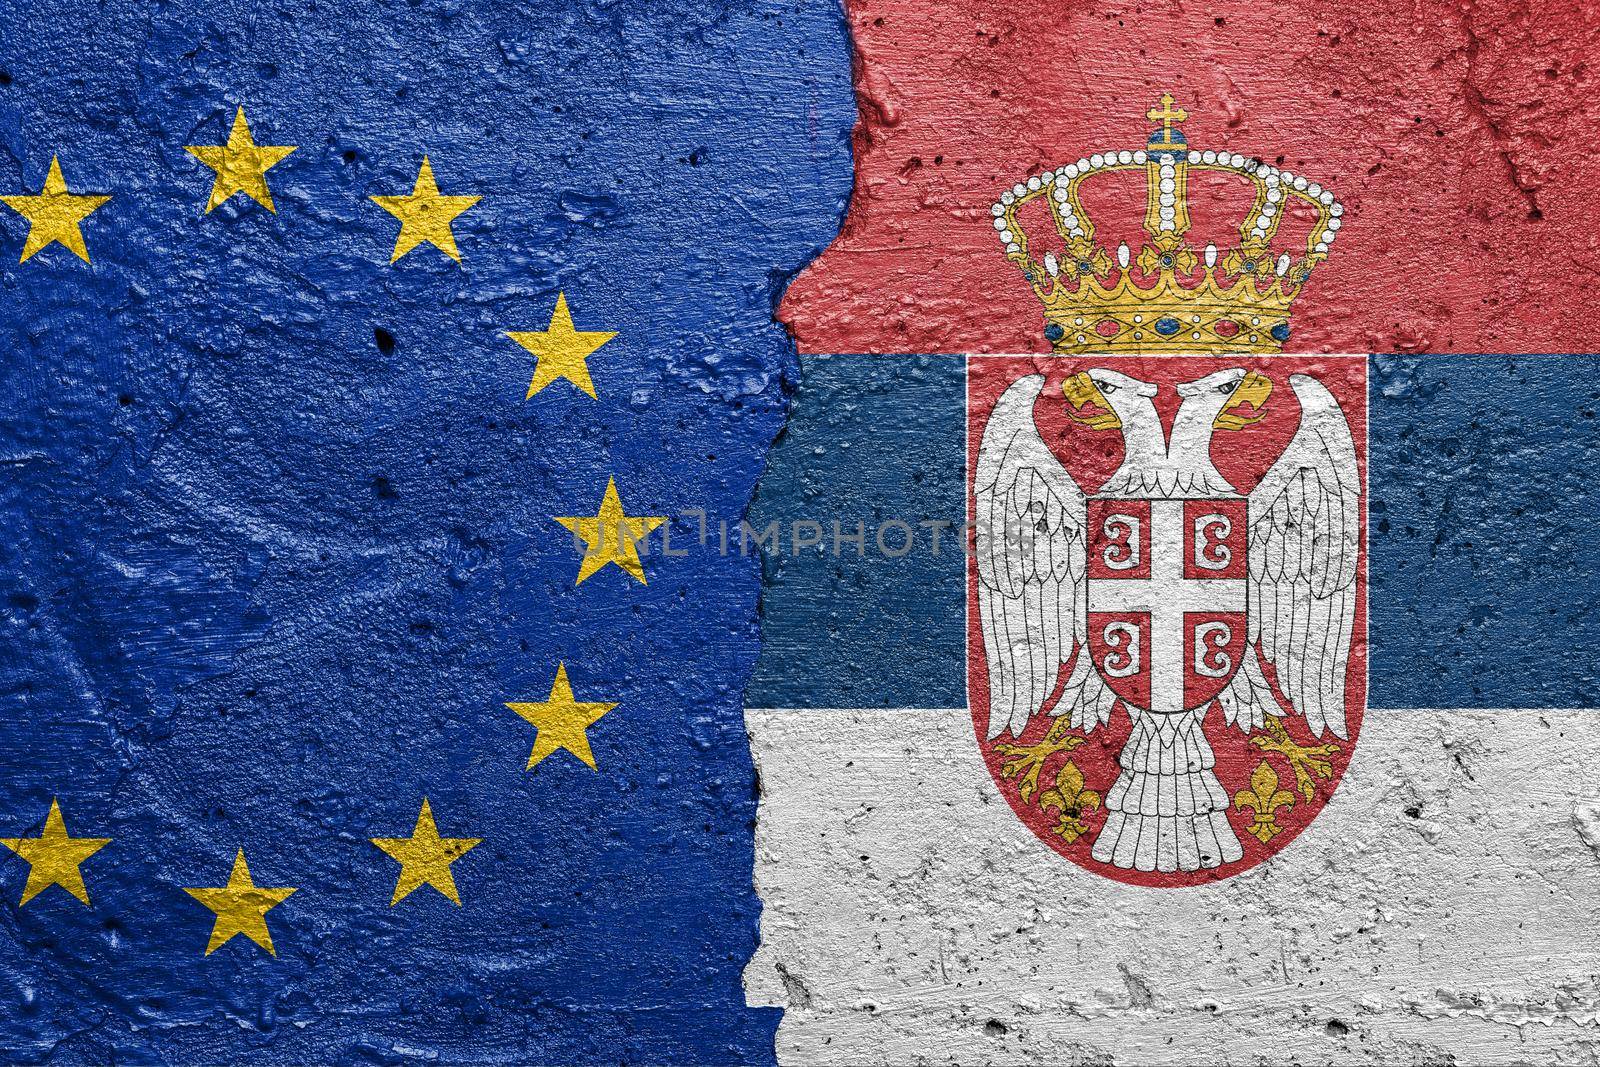 European Union and Serbia - Cracked concrete wall painted with a EU flag on the left and a Serbian flag on the right stock photo by adamr